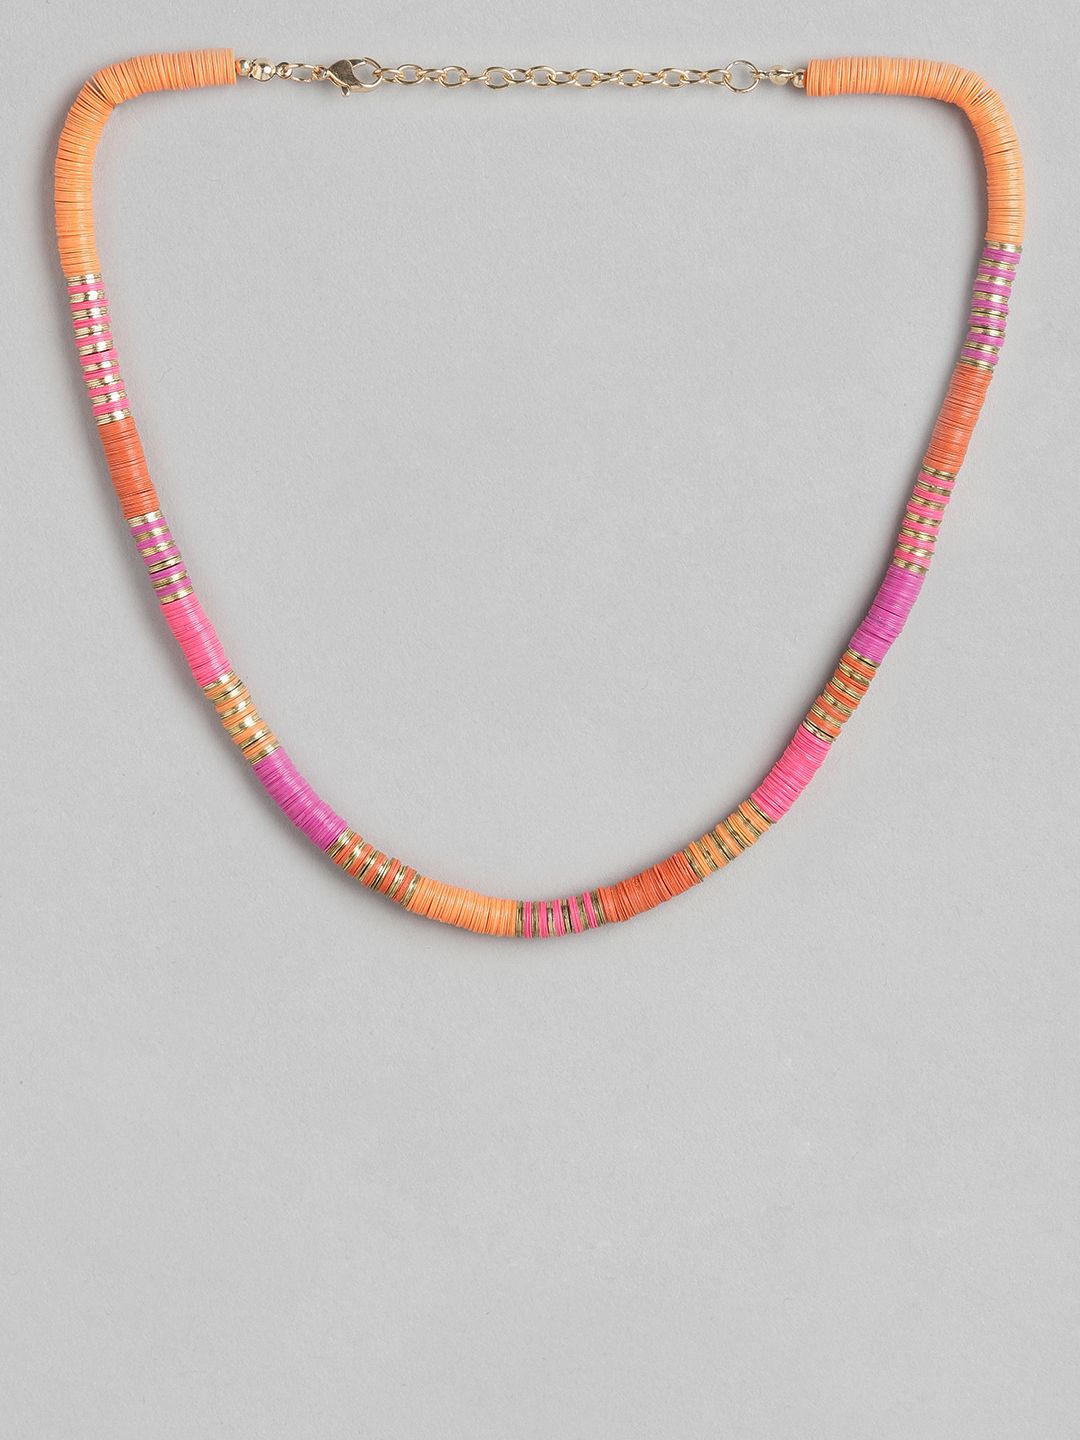 RICHEERA Pink & Gold-Toned Colourblocked Beaded Necklace Price in India